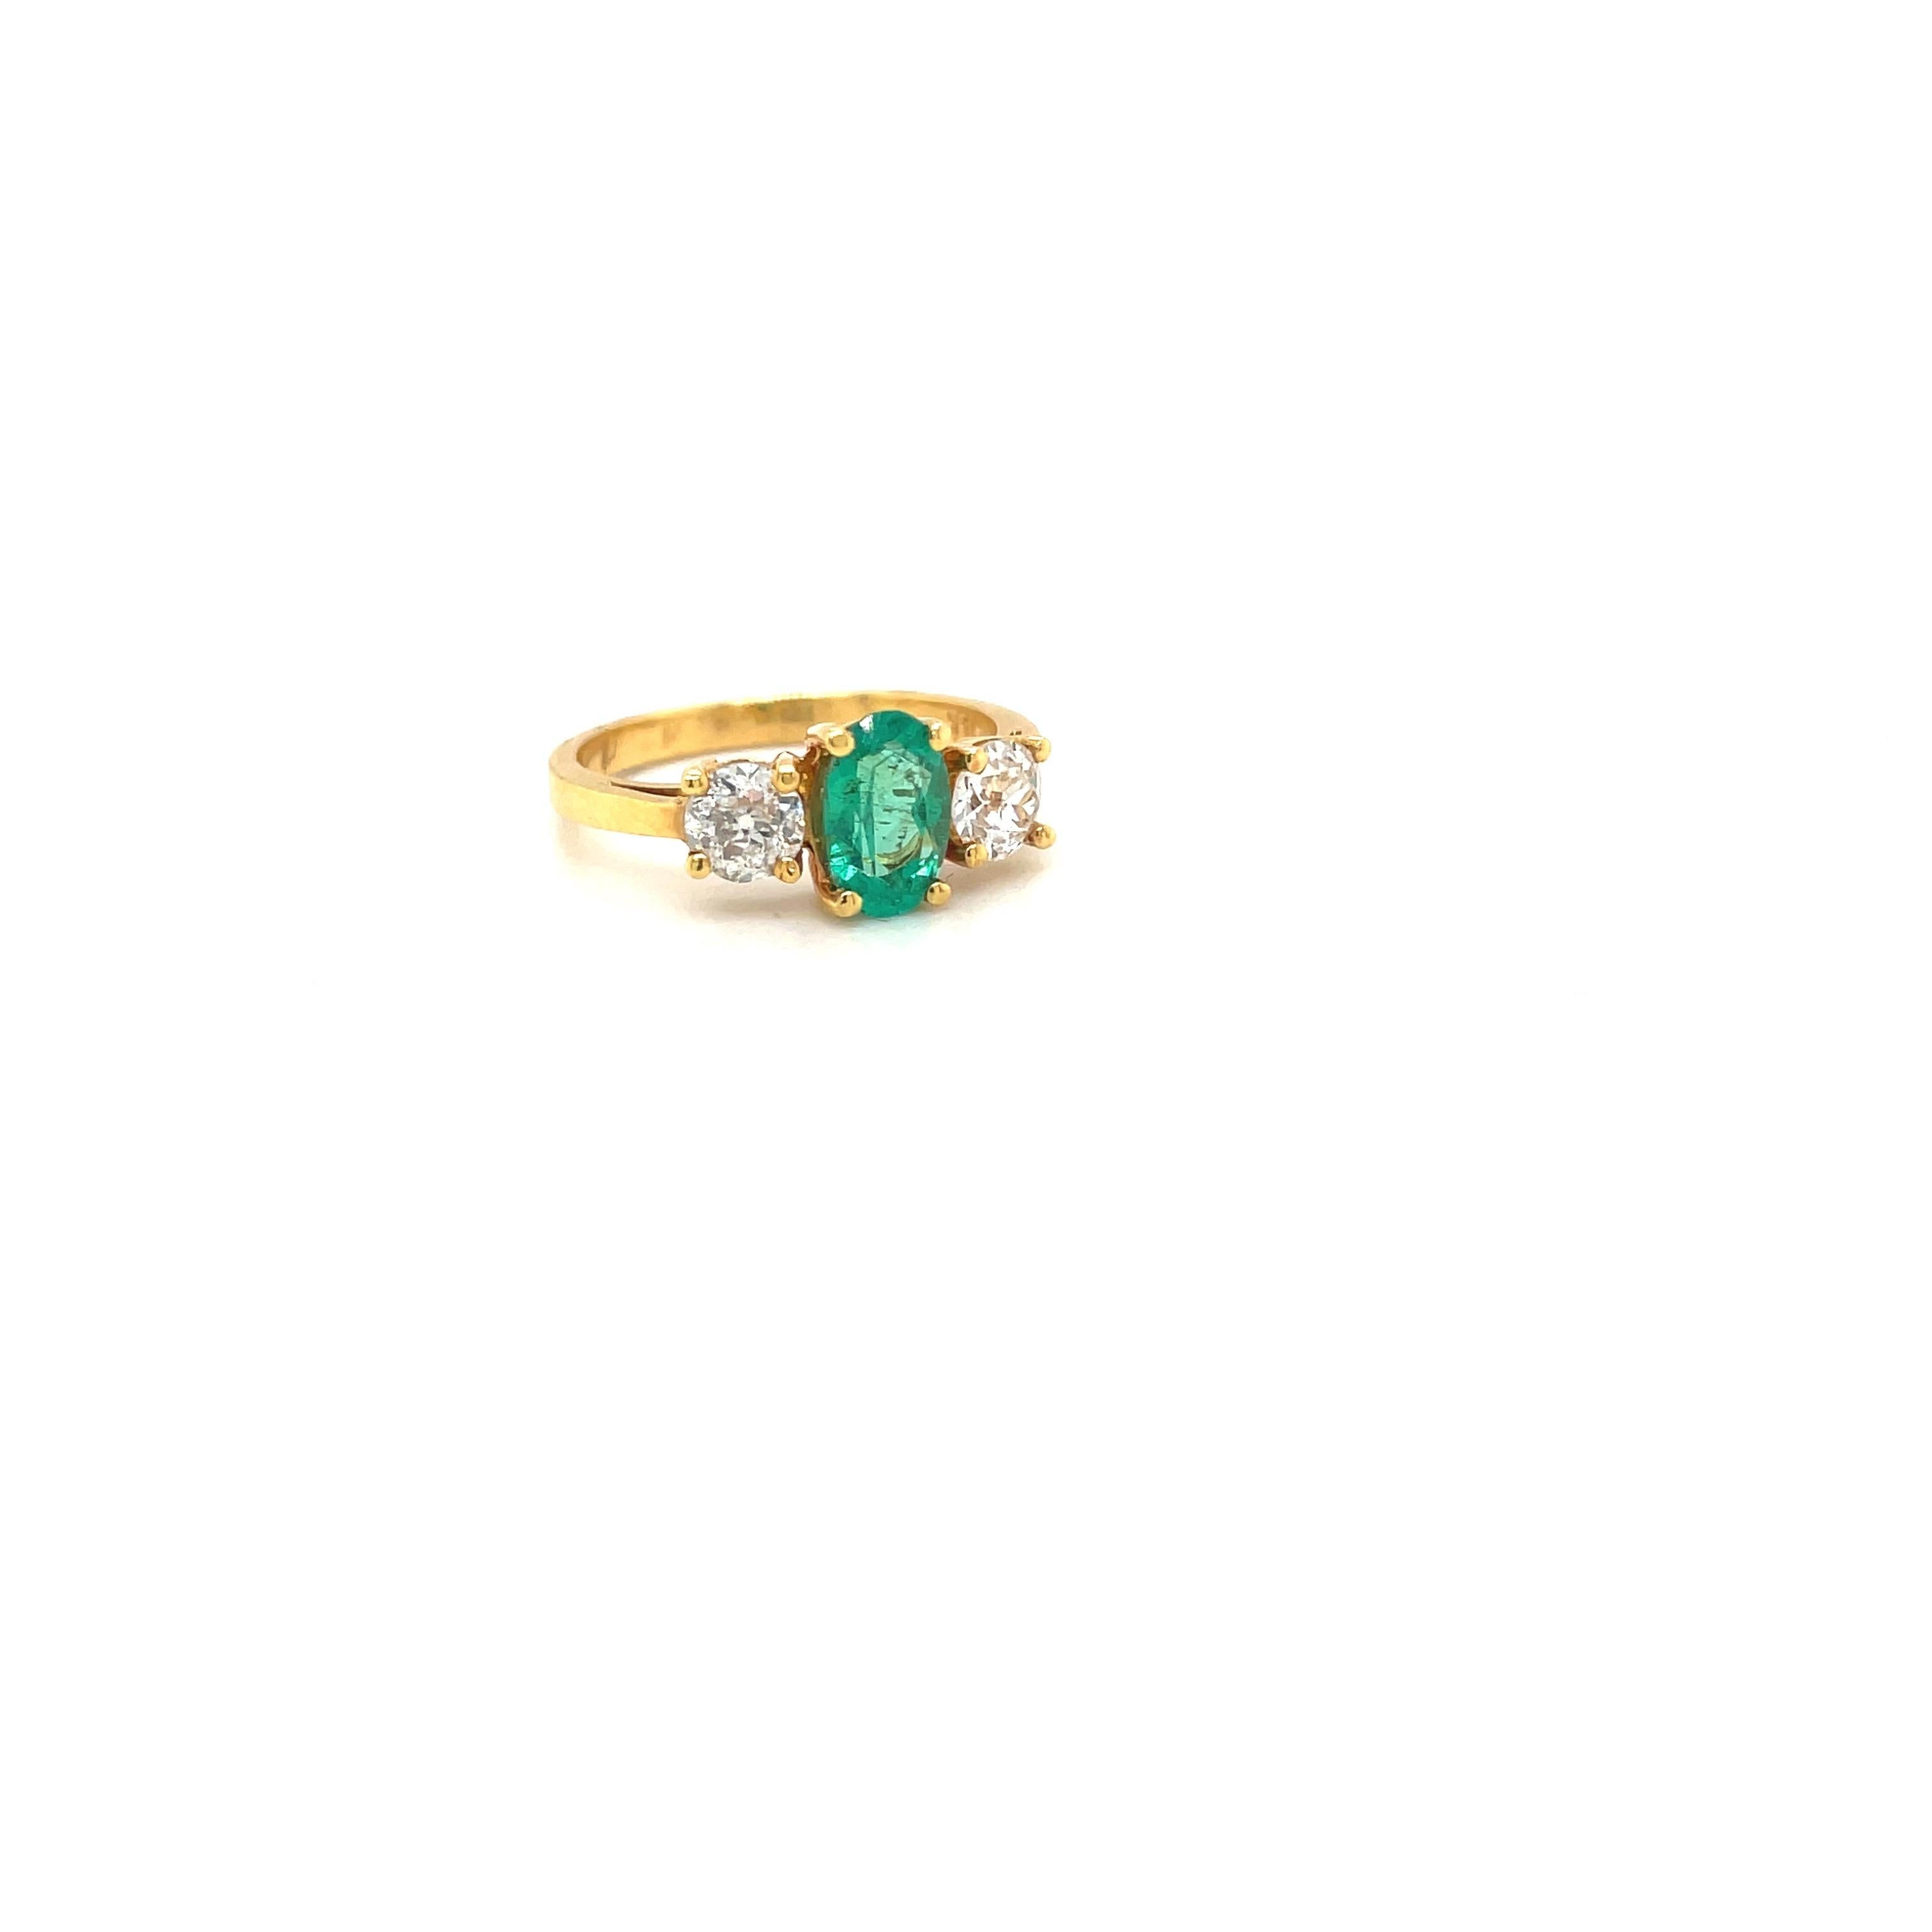 An oval emerald weighing 0.57carats is set in the center of this 18 karat yellow gold ring. The emerald is flanked by 2 round brilliant diamonds, total weight 0.46 carats.
Stamped 18K 5746
Size 6.25 sizing may be available
Cellini Jewelers 